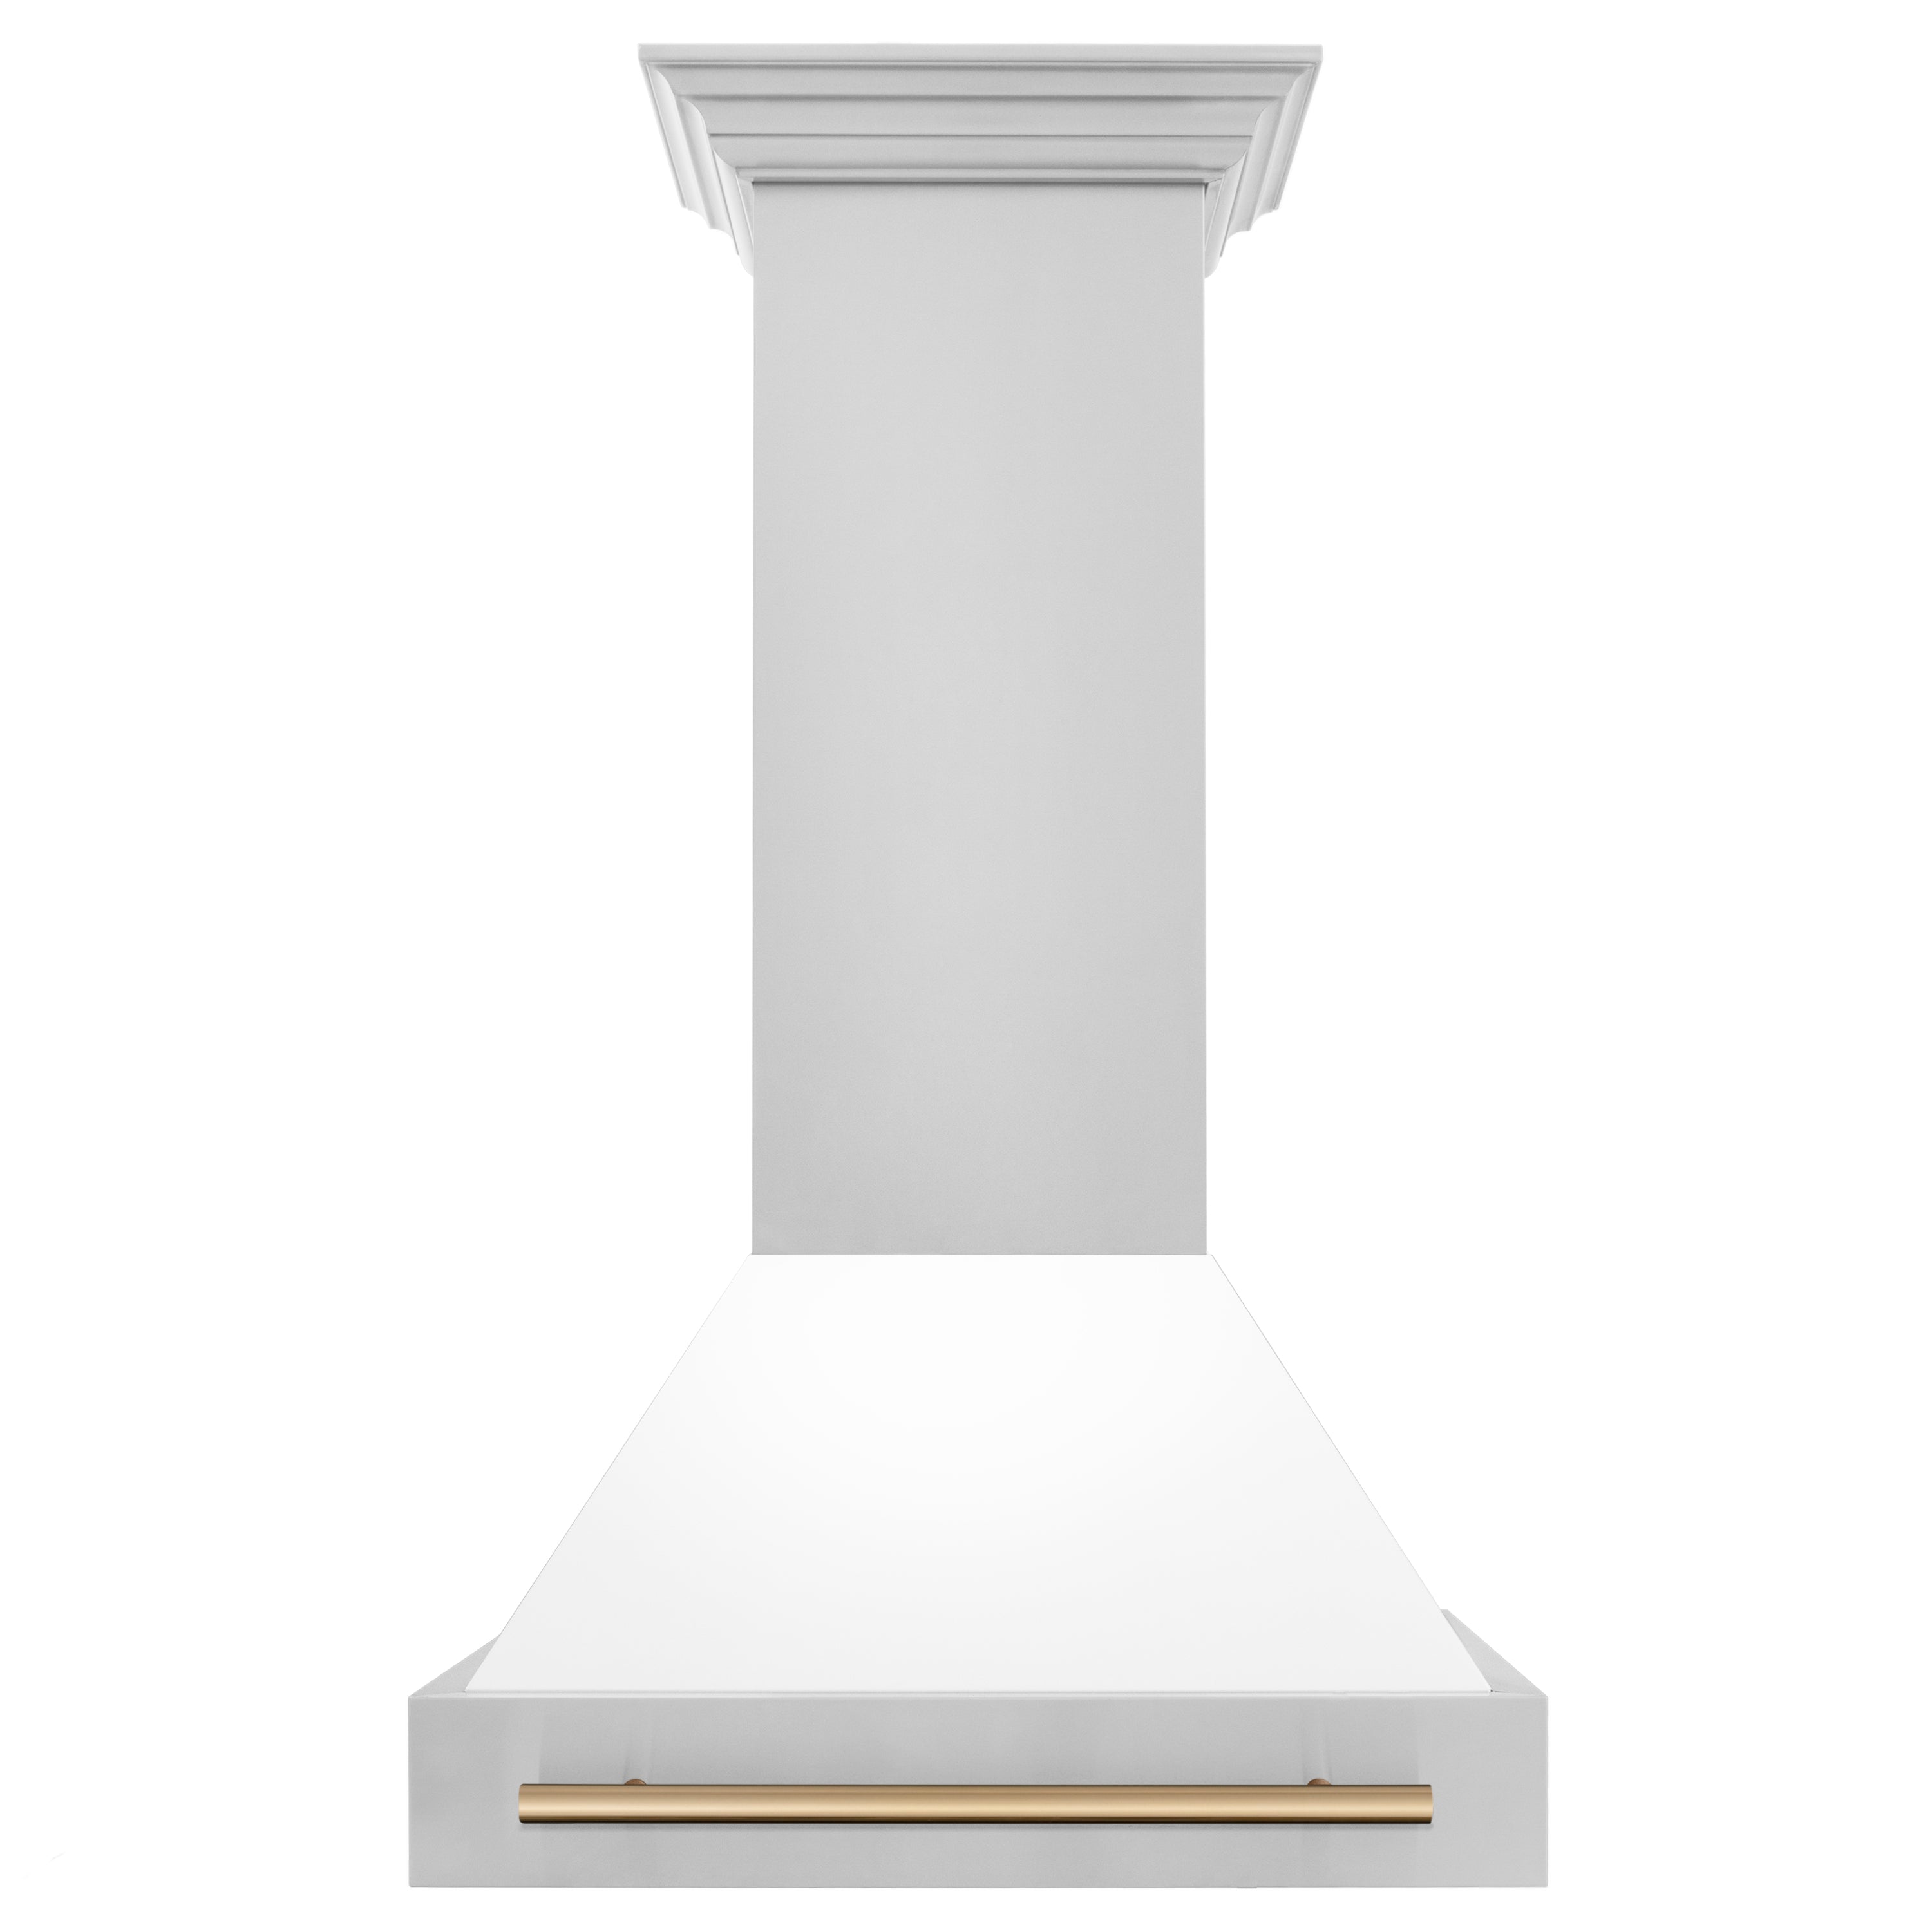 30" ZLINE Autograph Edition Stainless Steel Range Hood with White Matte Shell and Champagne Bronze Handle (8654STZ-WM30-CB)